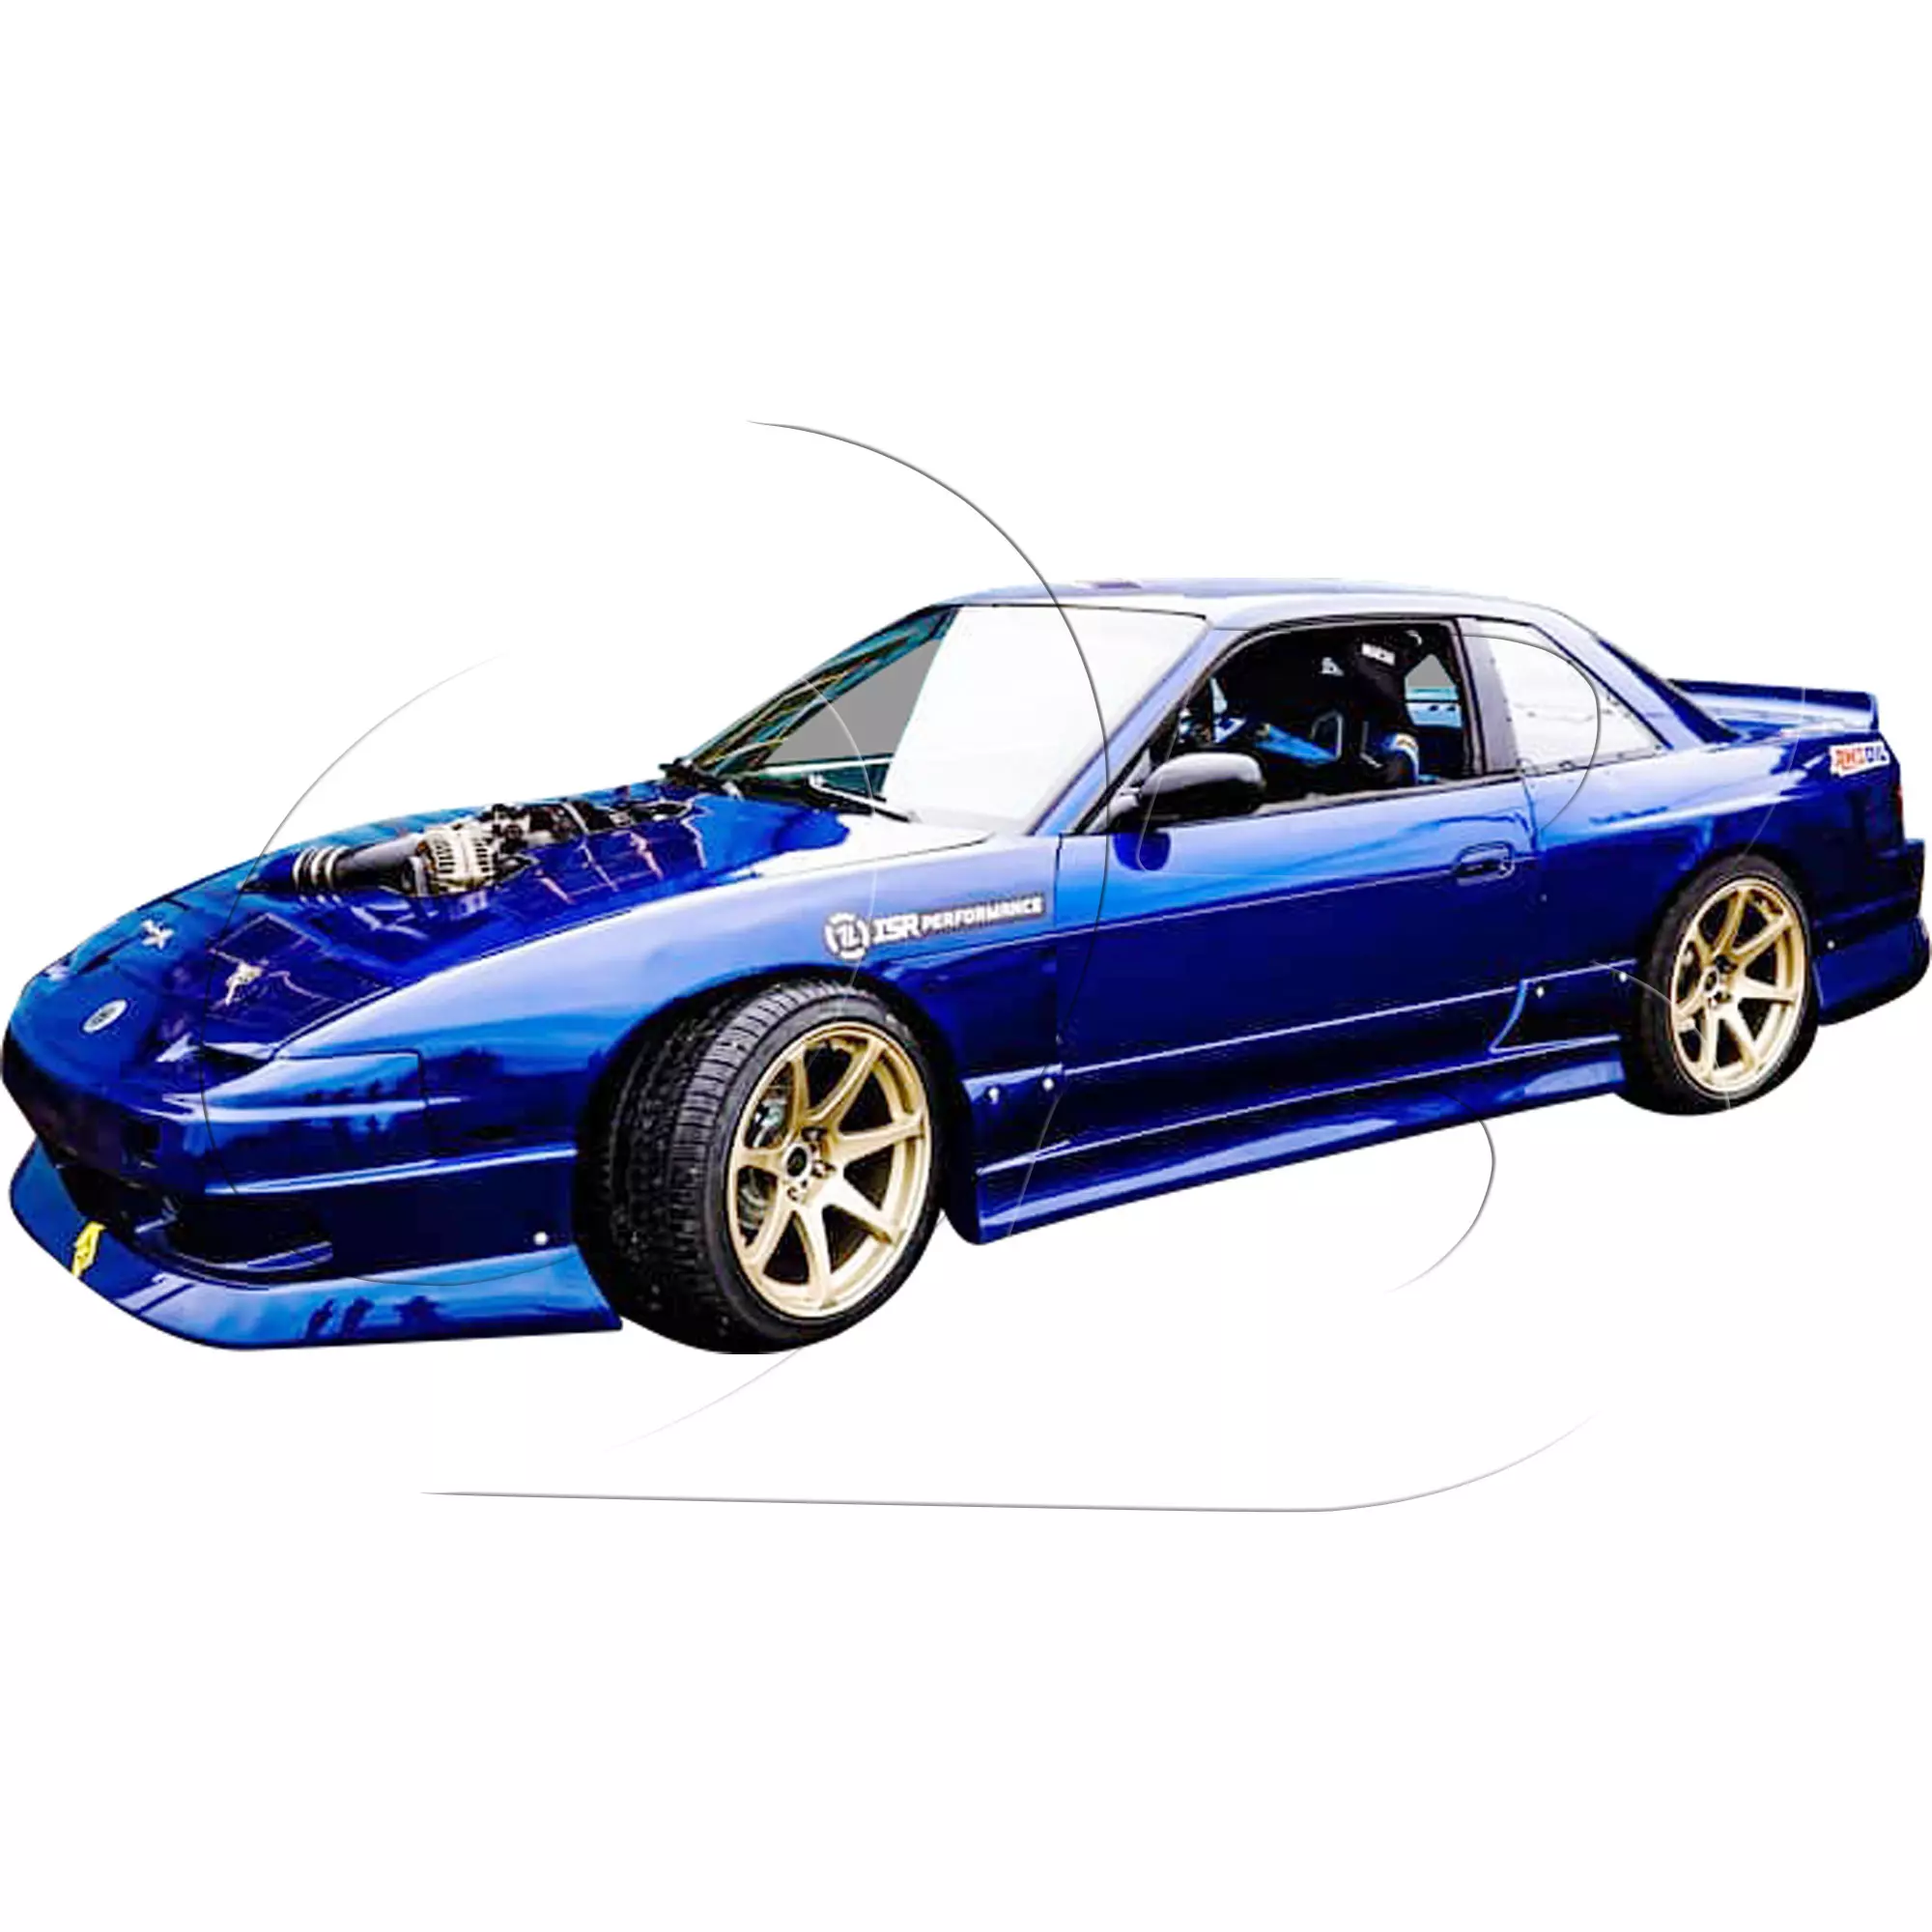 KBD Urethane Bsport2 Style 4pc Full Body Kit > Nissan 240SX 1989-1994 > 2dr Coupe - Image 53